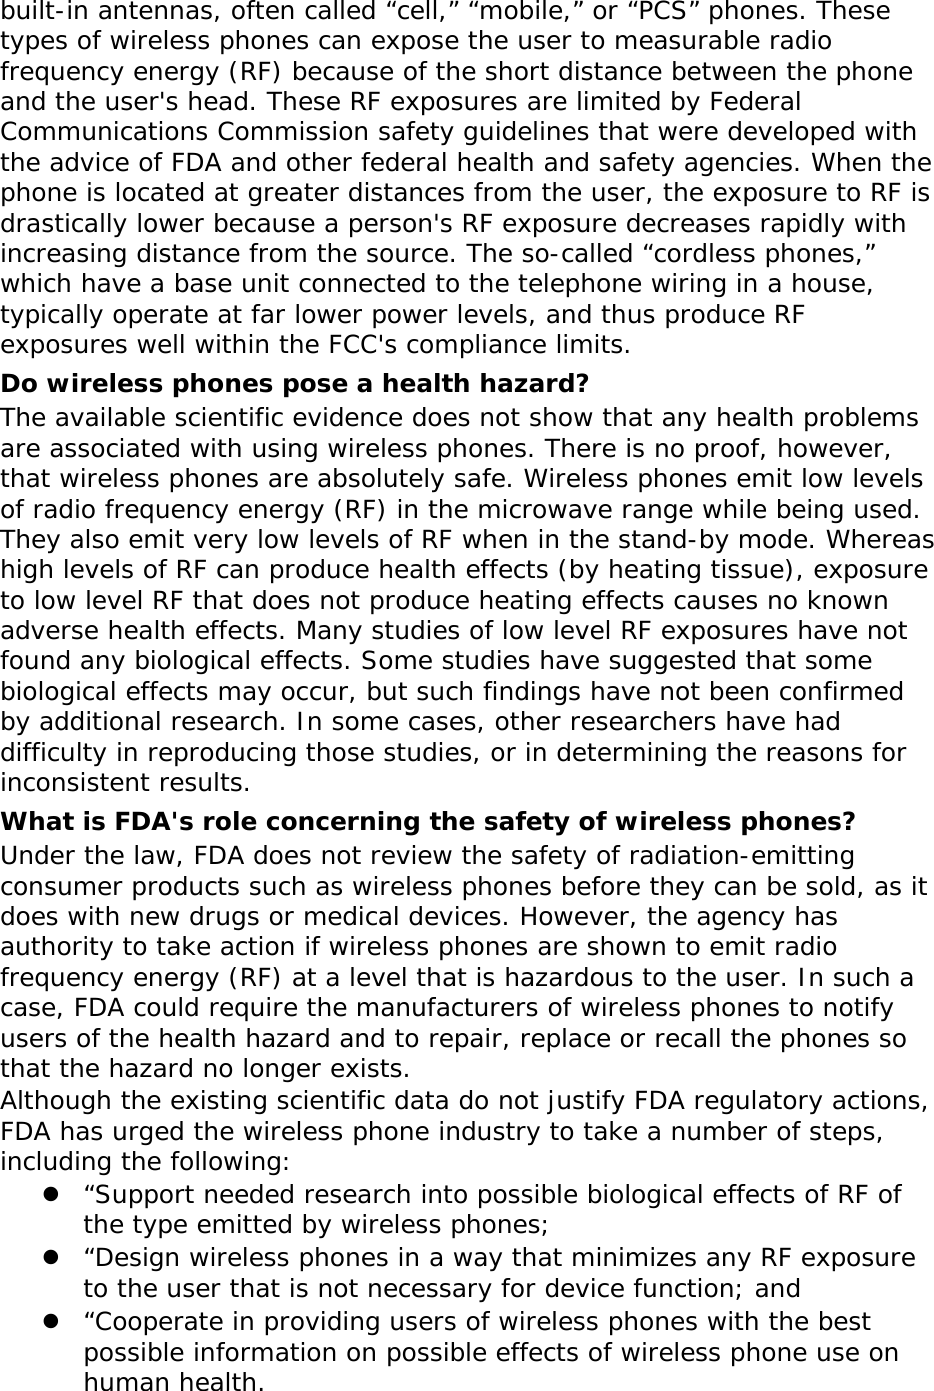 built-in antennas, often called “cell,” “mobile,” or “PCS” phones. These types of wireless phones can expose the user to measurable radio frequency energy (RF) because of the short distance between the phone and the user&apos;s head. These RF exposures are limited by Federal Communications Commission safety guidelines that were developed with the advice of FDA and other federal health and safety agencies. When the phone is located at greater distances from the user, the exposure to RF is drastically lower because a person&apos;s RF exposure decreases rapidly with increasing distance from the source. The so-called “cordless phones,” which have a base unit connected to the telephone wiring in a house, typically operate at far lower power levels, and thus produce RF exposures well within the FCC&apos;s compliance limits. Do wireless phones pose a health hazard? The available scientific evidence does not show that any health problems are associated with using wireless phones. There is no proof, however, that wireless phones are absolutely safe. Wireless phones emit low levels of radio frequency energy (RF) in the microwave range while being used. They also emit very low levels of RF when in the stand-by mode. Whereas high levels of RF can produce health effects (by heating tissue), exposure to low level RF that does not produce heating effects causes no known adverse health effects. Many studies of low level RF exposures have not found any biological effects. Some studies have suggested that some biological effects may occur, but such findings have not been confirmed by additional research. In some cases, other researchers have had difficulty in reproducing those studies, or in determining the reasons for inconsistent results. What is FDA&apos;s role concerning the safety of wireless phones? Under the law, FDA does not review the safety of radiation-emitting consumer products such as wireless phones before they can be sold, as it does with new drugs or medical devices. However, the agency has authority to take action if wireless phones are shown to emit radio frequency energy (RF) at a level that is hazardous to the user. In such a case, FDA could require the manufacturers of wireless phones to notify users of the health hazard and to repair, replace or recall the phones so that the hazard no longer exists. Although the existing scientific data do not justify FDA regulatory actions, FDA has urged the wireless phone industry to take a number of steps, including the following: z “Support needed research into possible biological effects of RF of the type emitted by wireless phones; z “Design wireless phones in a way that minimizes any RF exposure to the user that is not necessary for device function; and z “Cooperate in providing users of wireless phones with the best possible information on possible effects of wireless phone use on human health. 